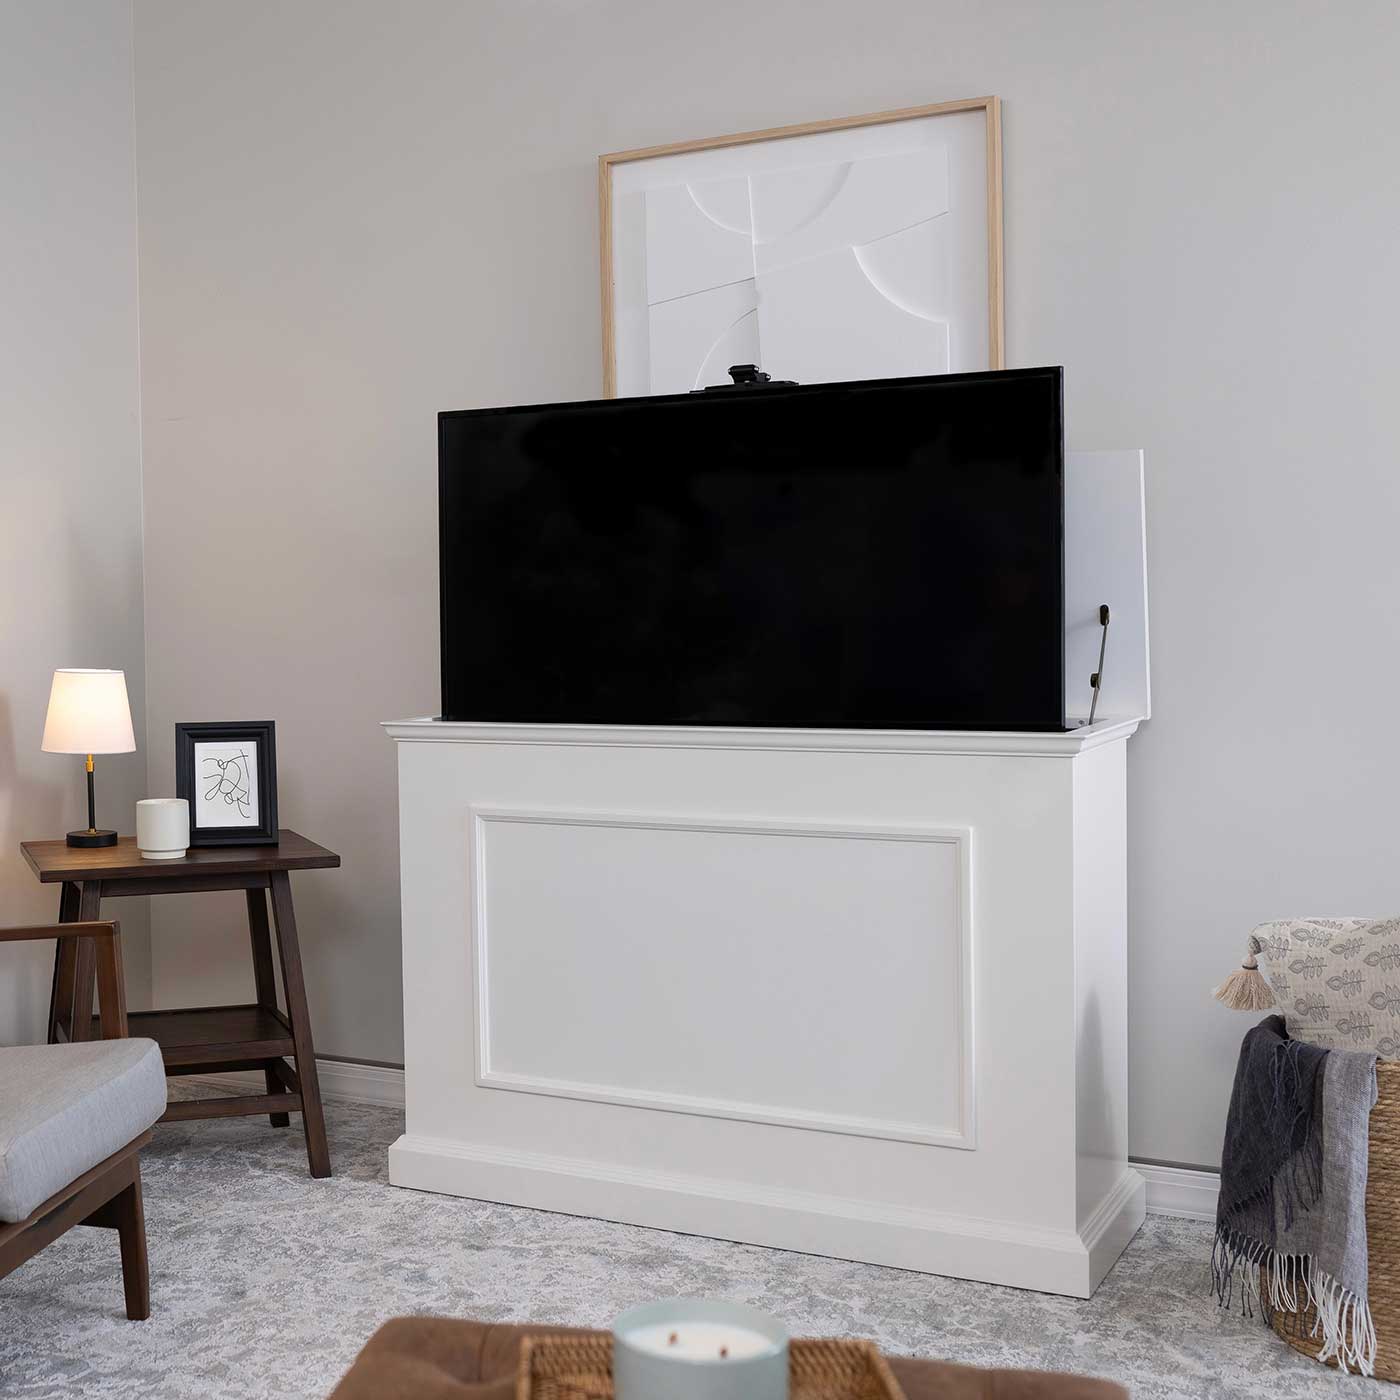 Touchstone Elevate 72015 TV Lift raises the hidden TV into view in the living room